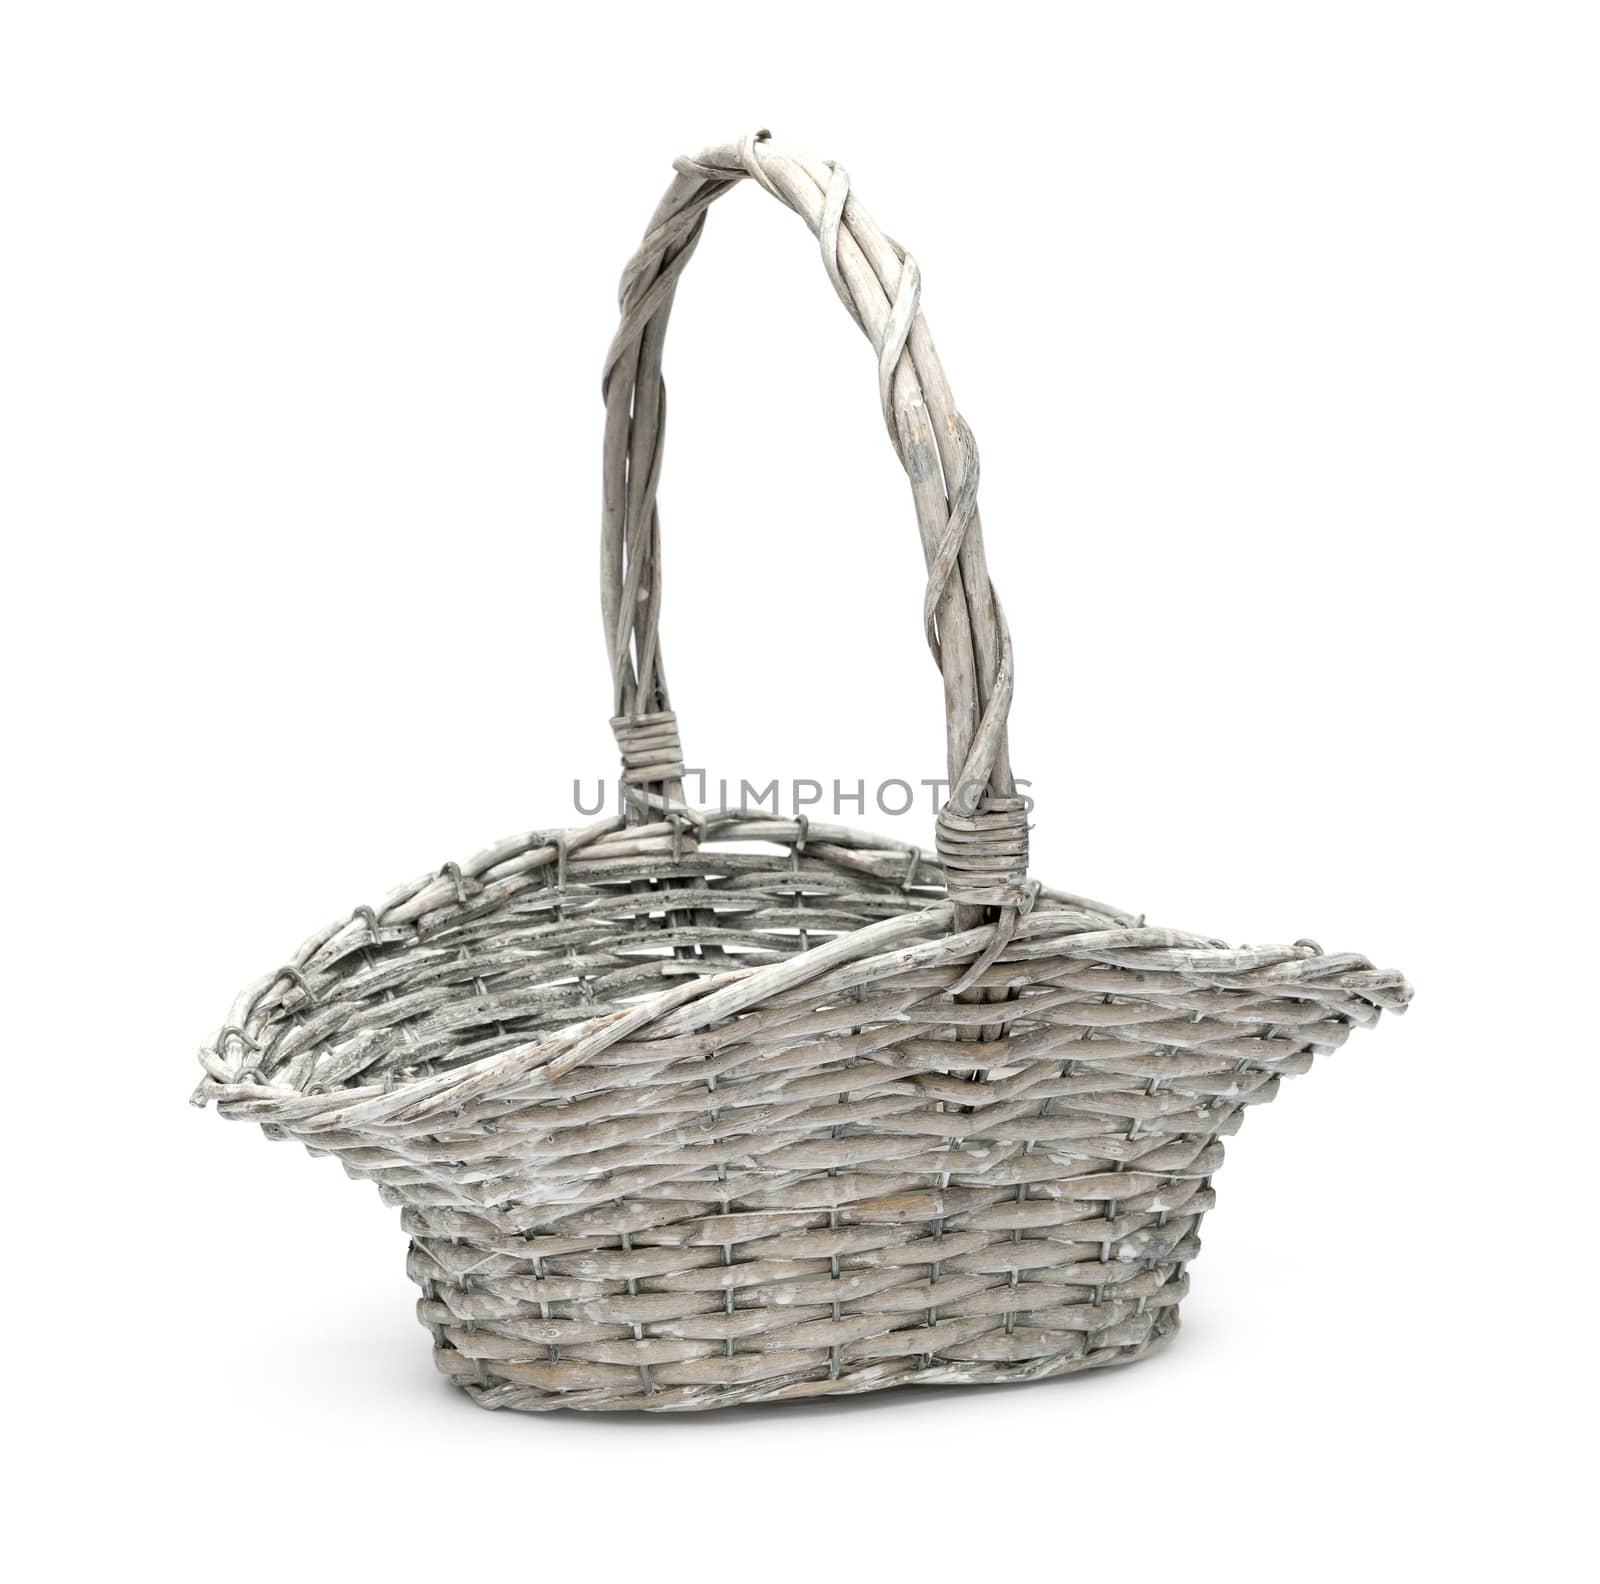 Basket isolated on white background by DNKSTUDIO